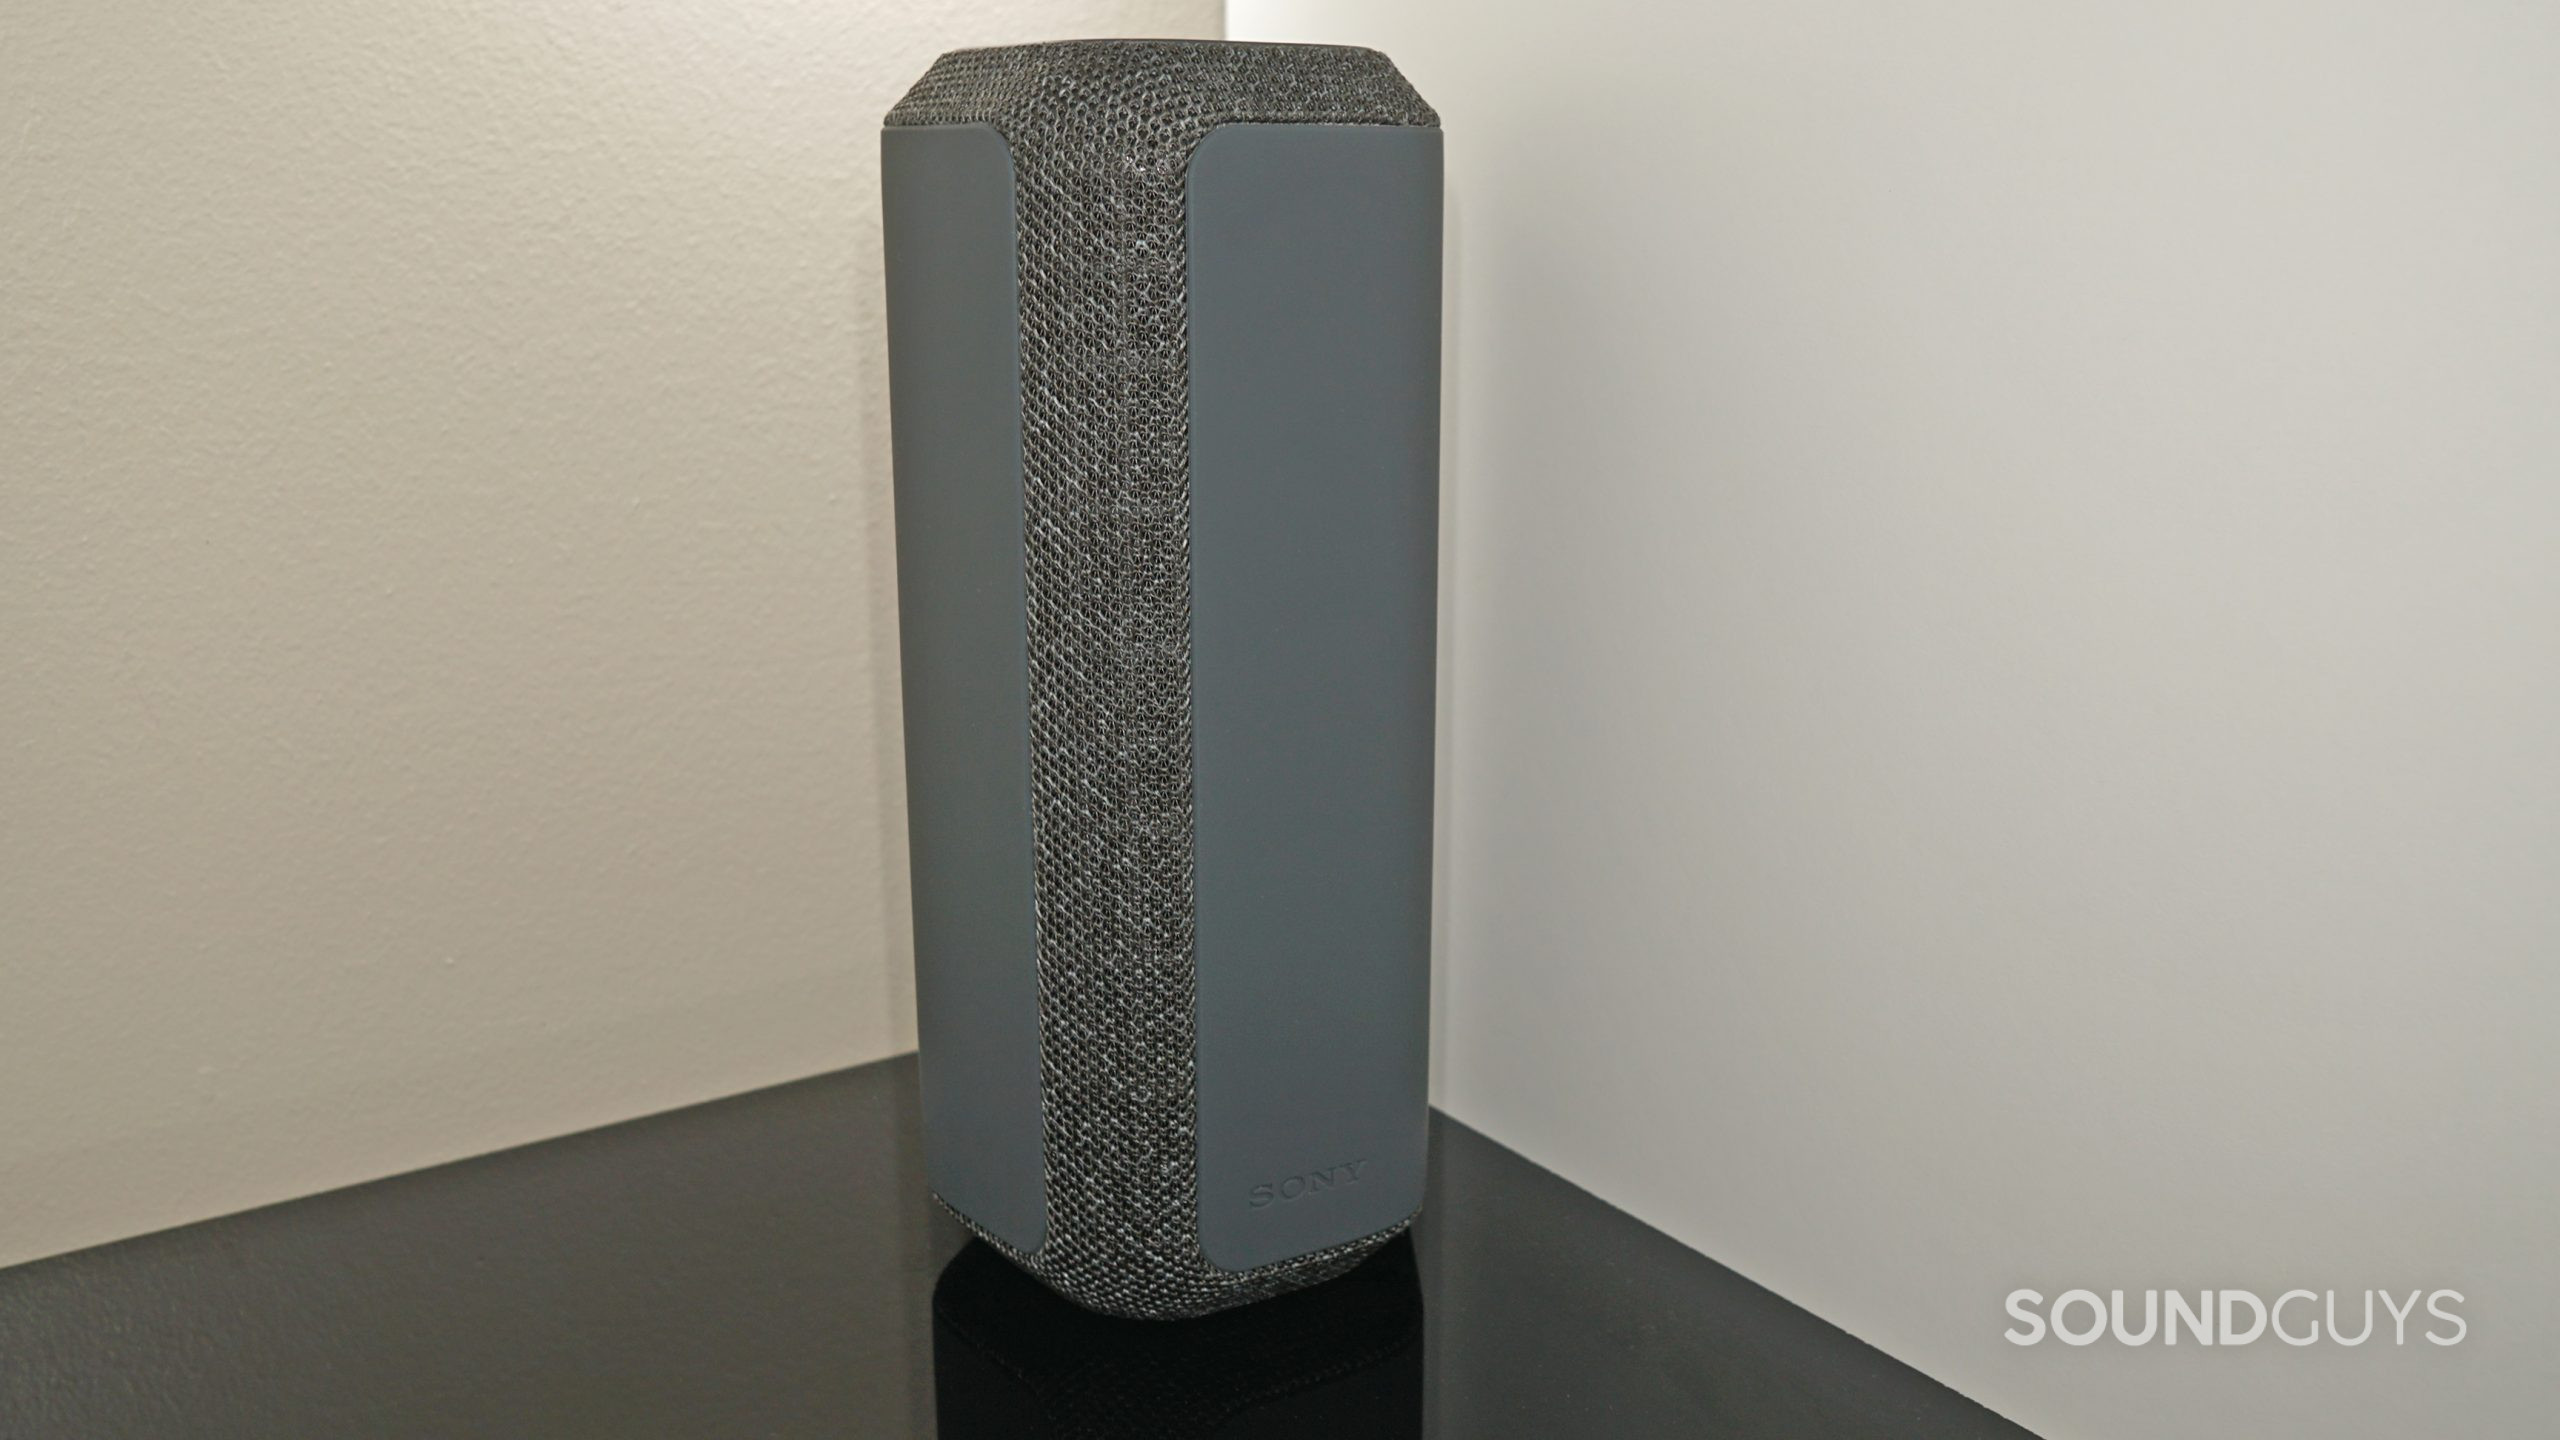 The Sony SRS-XE300 bluetooth speaker stands on a shelf.